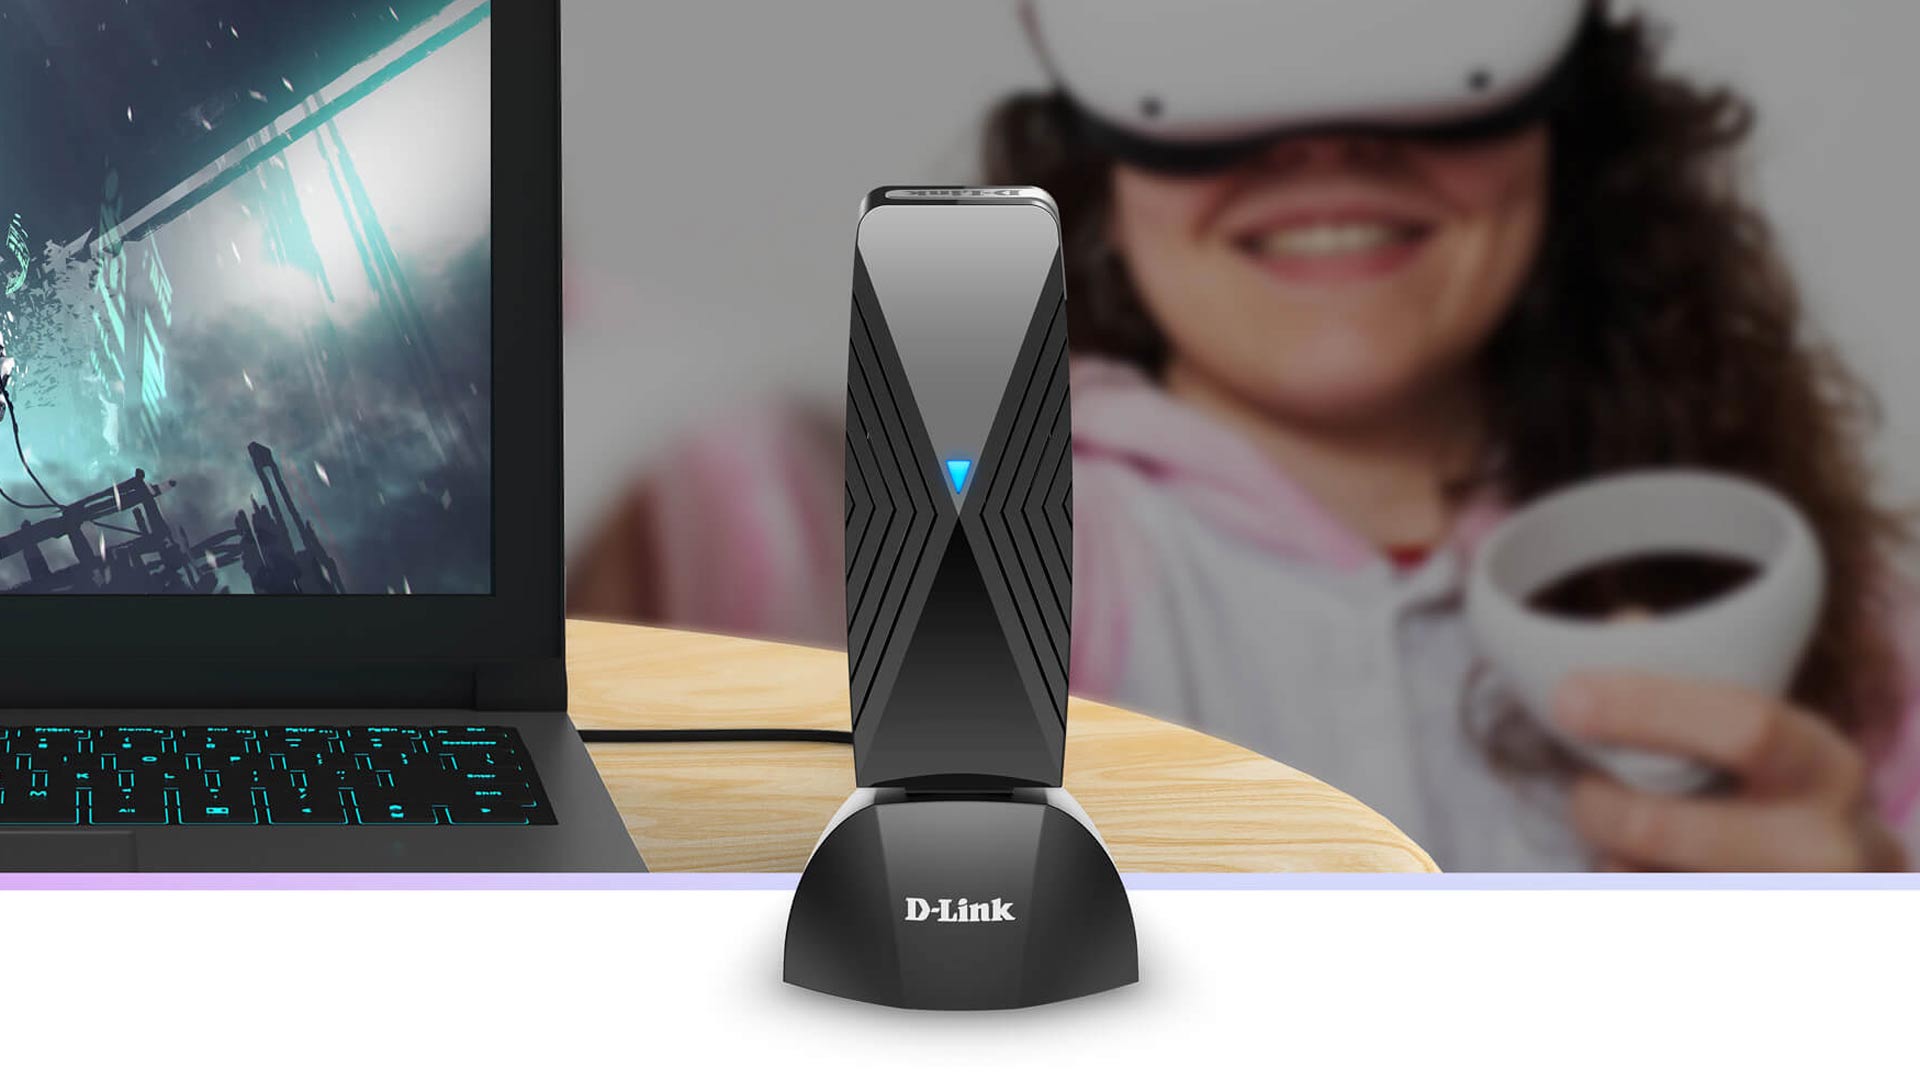 D-Link’s New ‘VR Air Bridge’ Dongle Gives Quest 2 Dedicated Wi-Fi Connection for PC VR Gaming – Road to VR